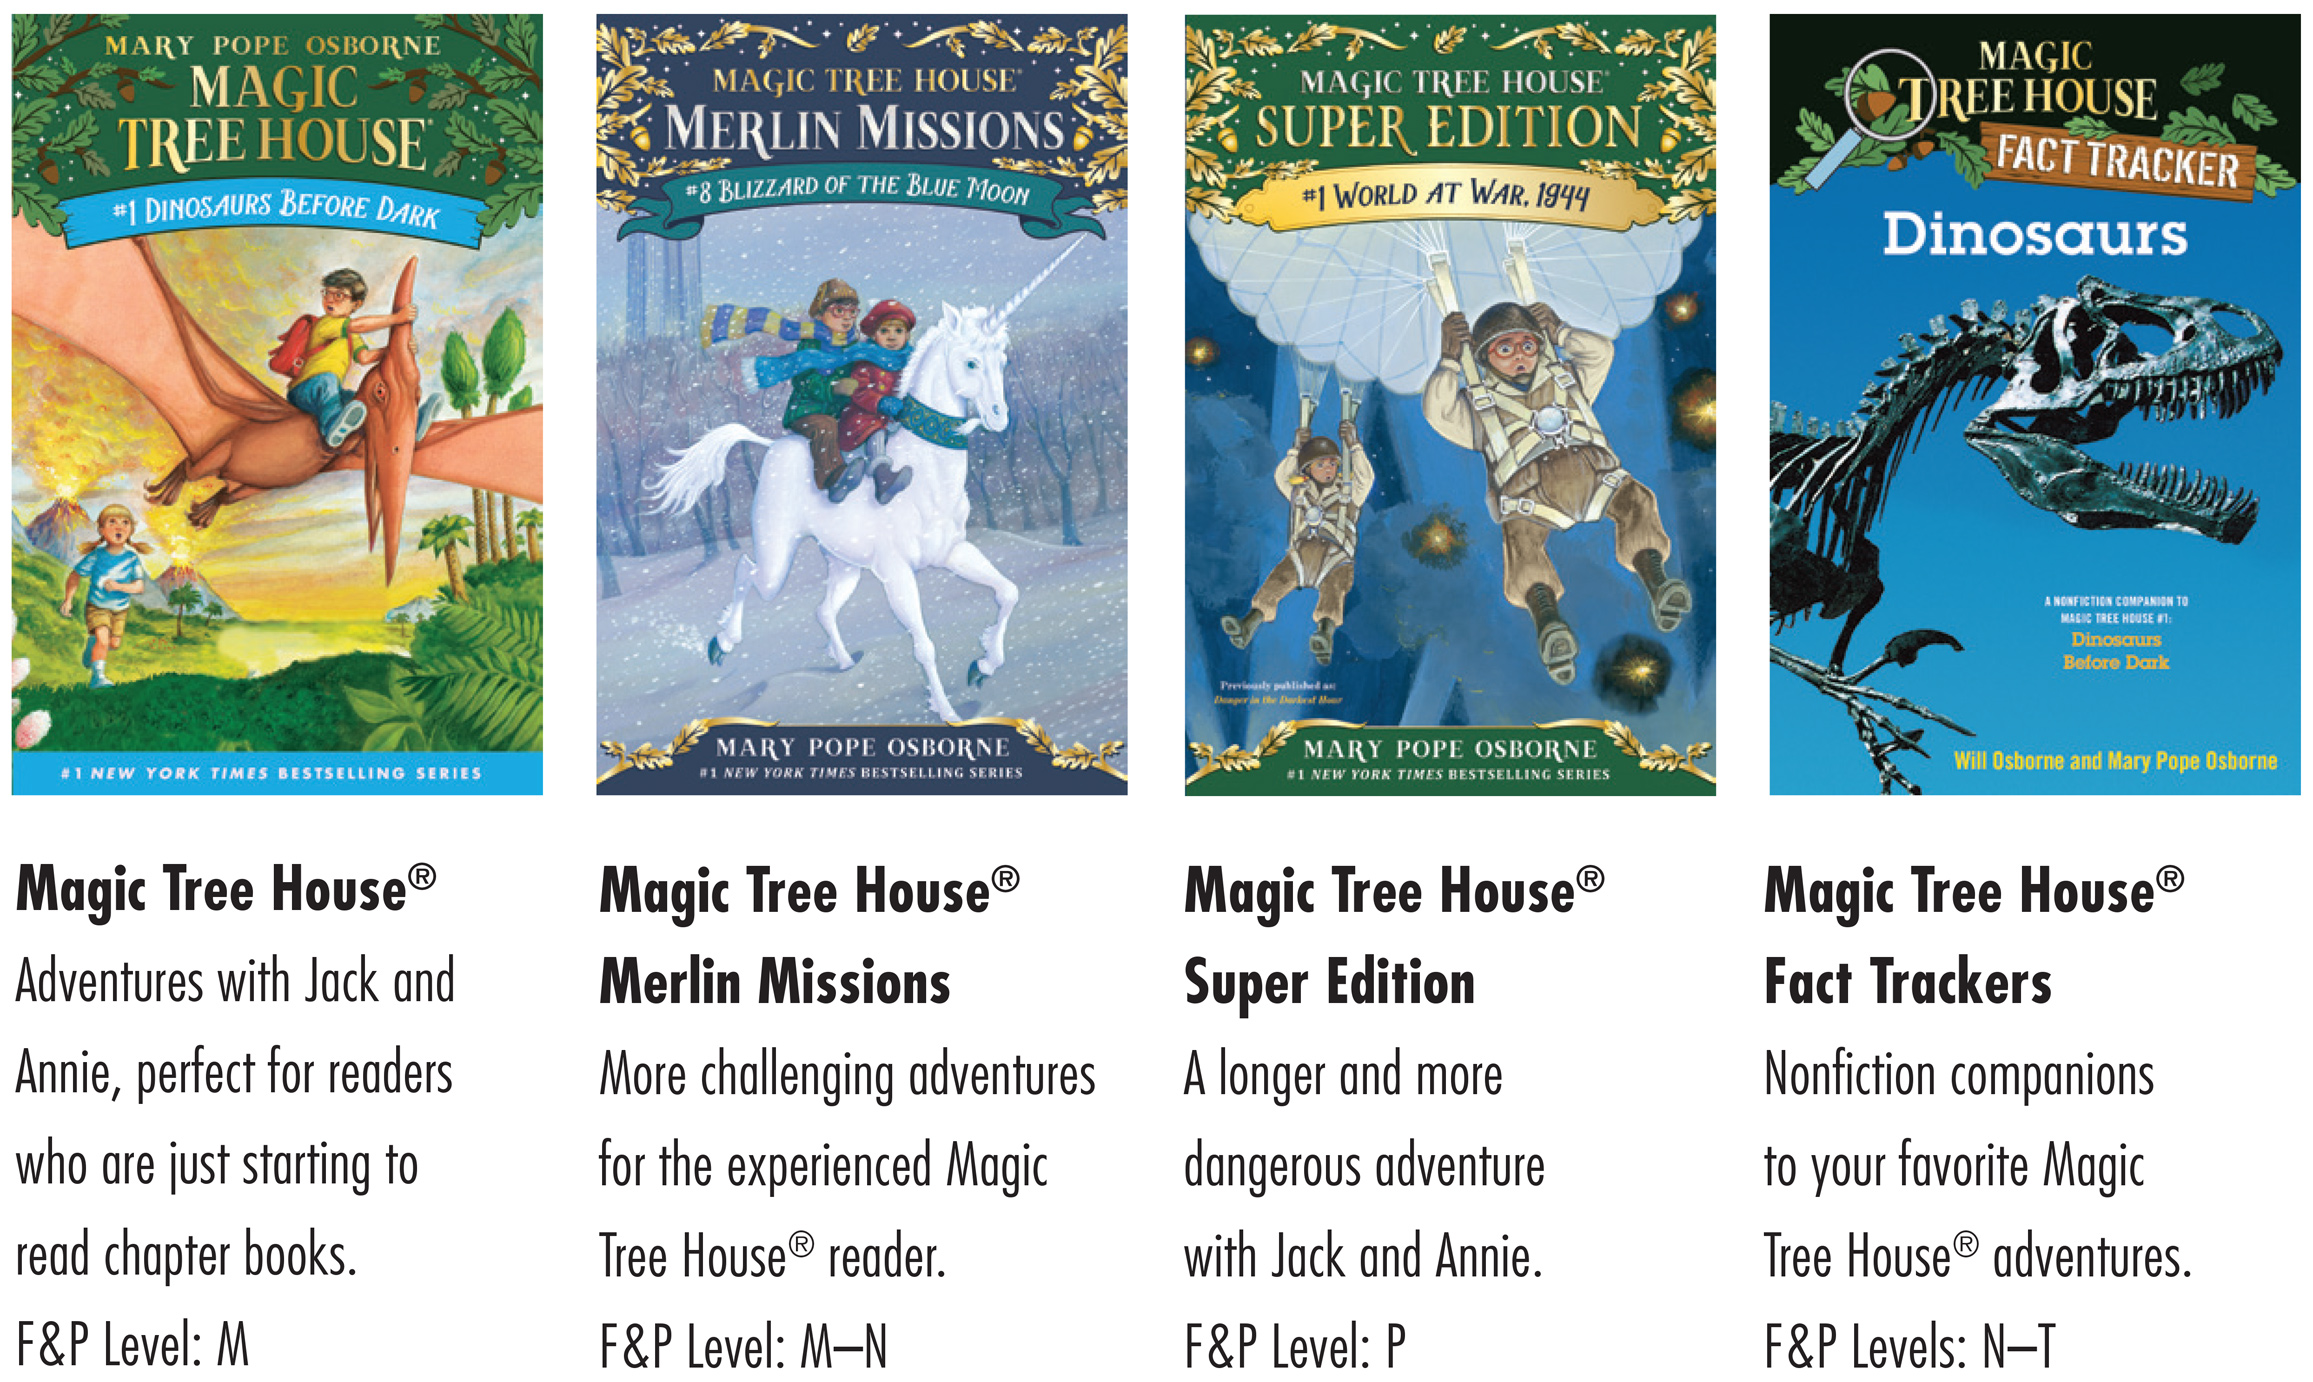 Cover images with descriptions for each series: Magic Tree House; Adventures with Jack and Annie, perfect for readers who are just starting to read chapter books; F&P Level M. Magic Tree House Merlin Missions; More challenging adventures for the experienced Magic Tree House reader; F&P Level M–N. Magic Tree House Super Edition; A longer and more dangerous adventure with Jack and Annie; F&P Level P. Magic Tree House Fact Trackers; Nonfiction companions to your favorite Magic Tree House adventures; F&P Levels N–T